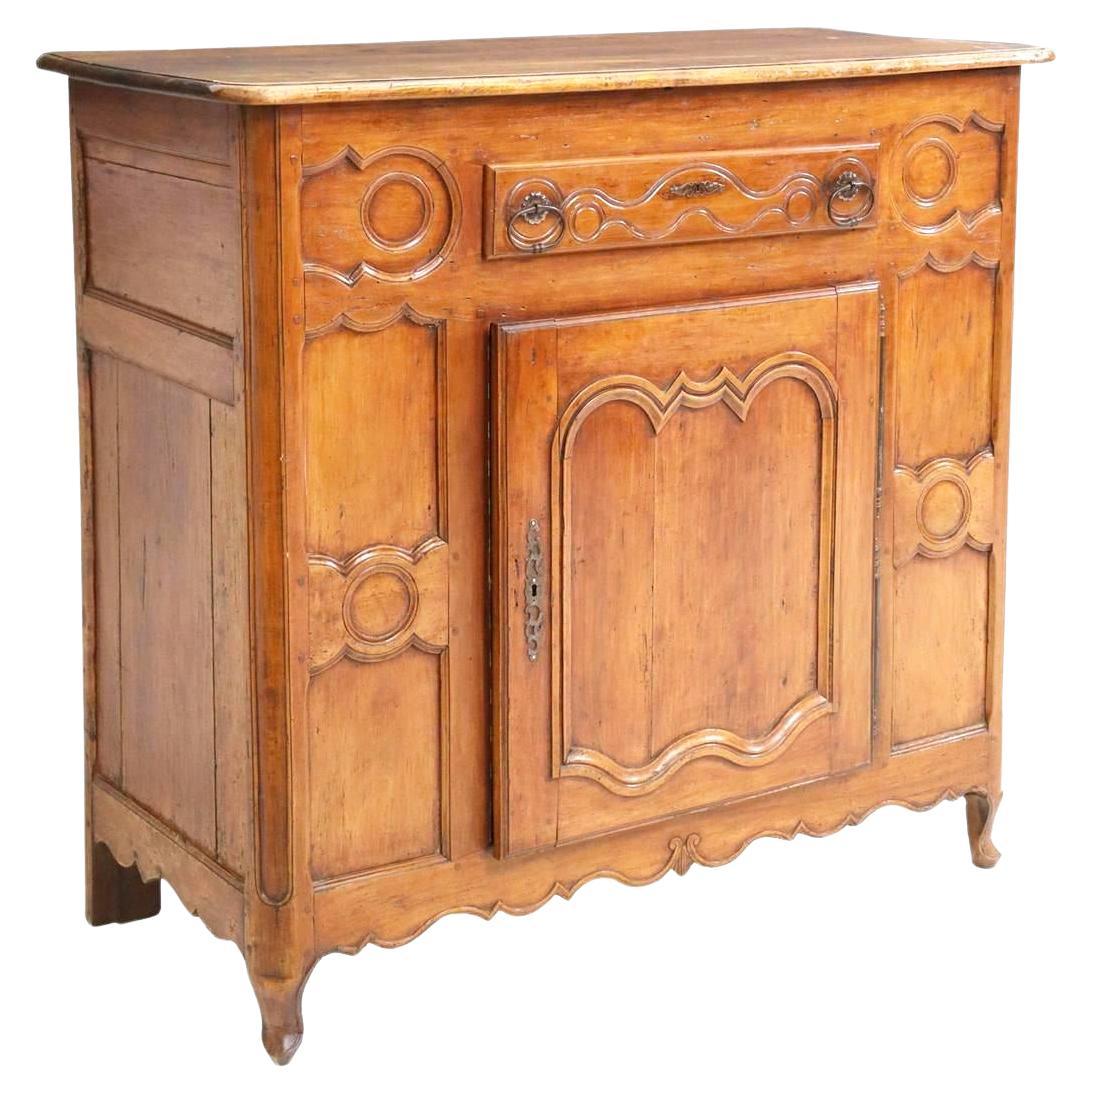 Late 19th Century Antique French Louis XV Style Fruitwood Confiturier Cabinet For Sale